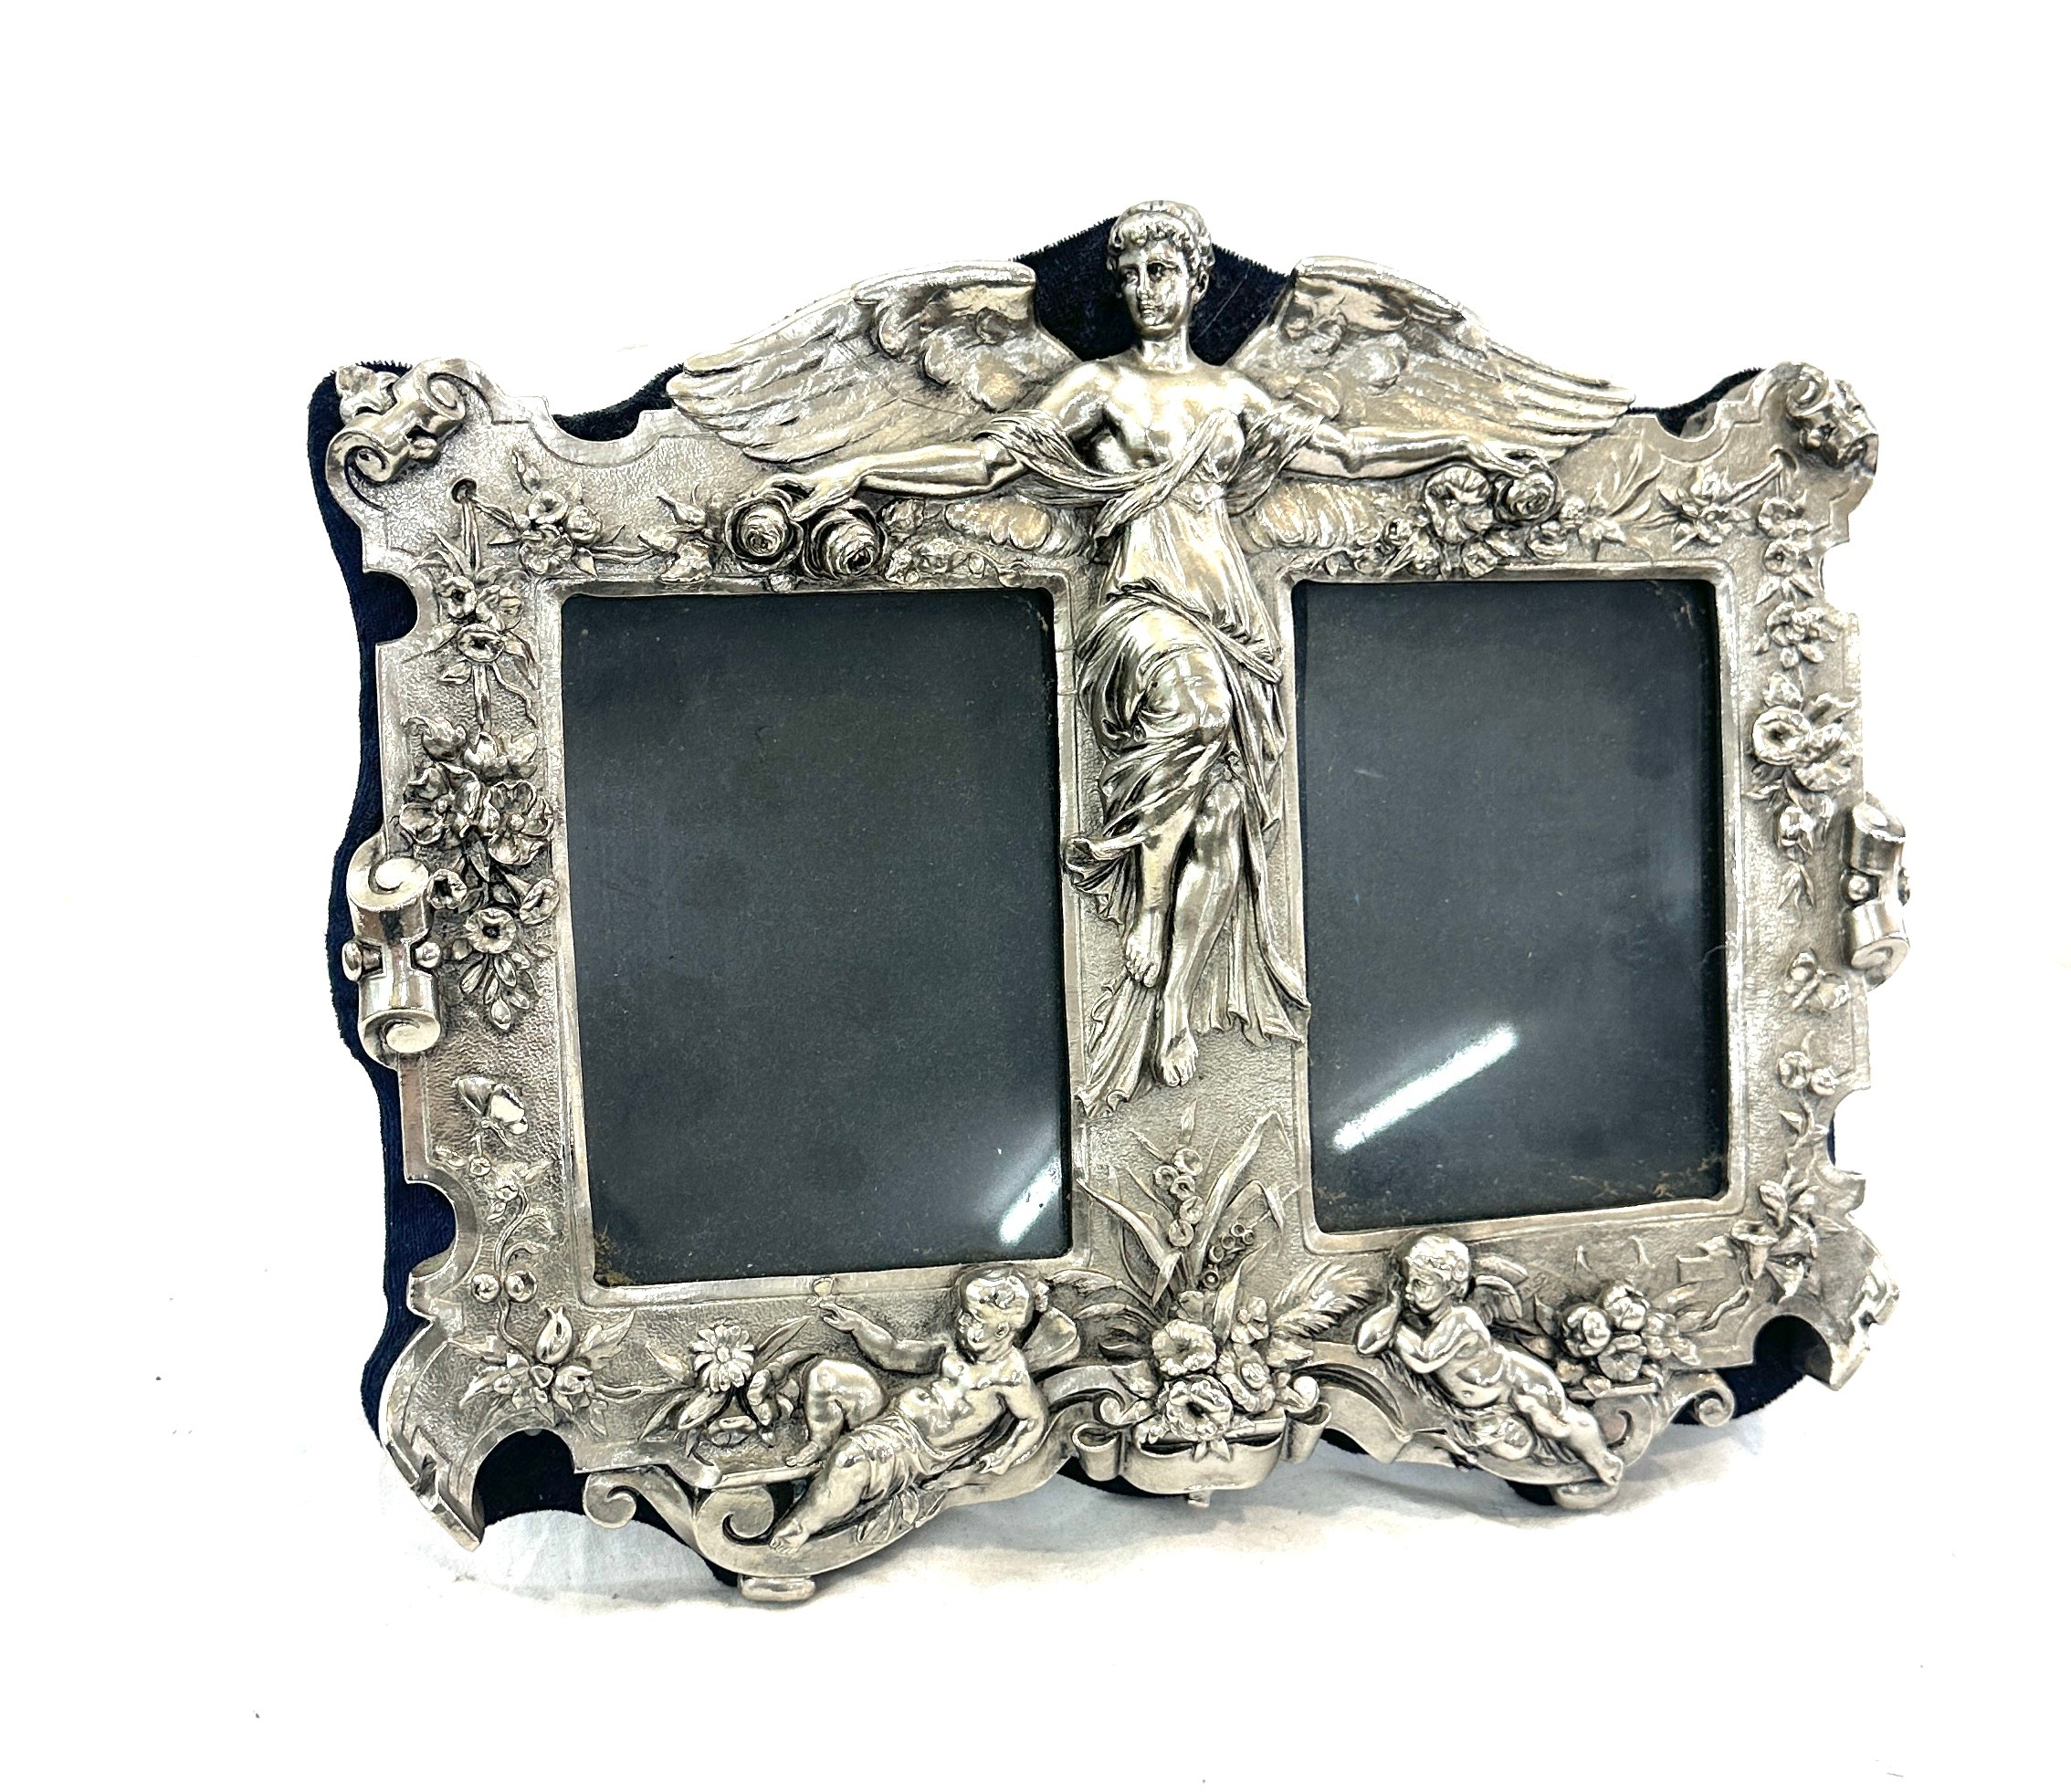 Large silver coloured double photo frame, approximate measurements: 13 x 11 inches - Image 2 of 3